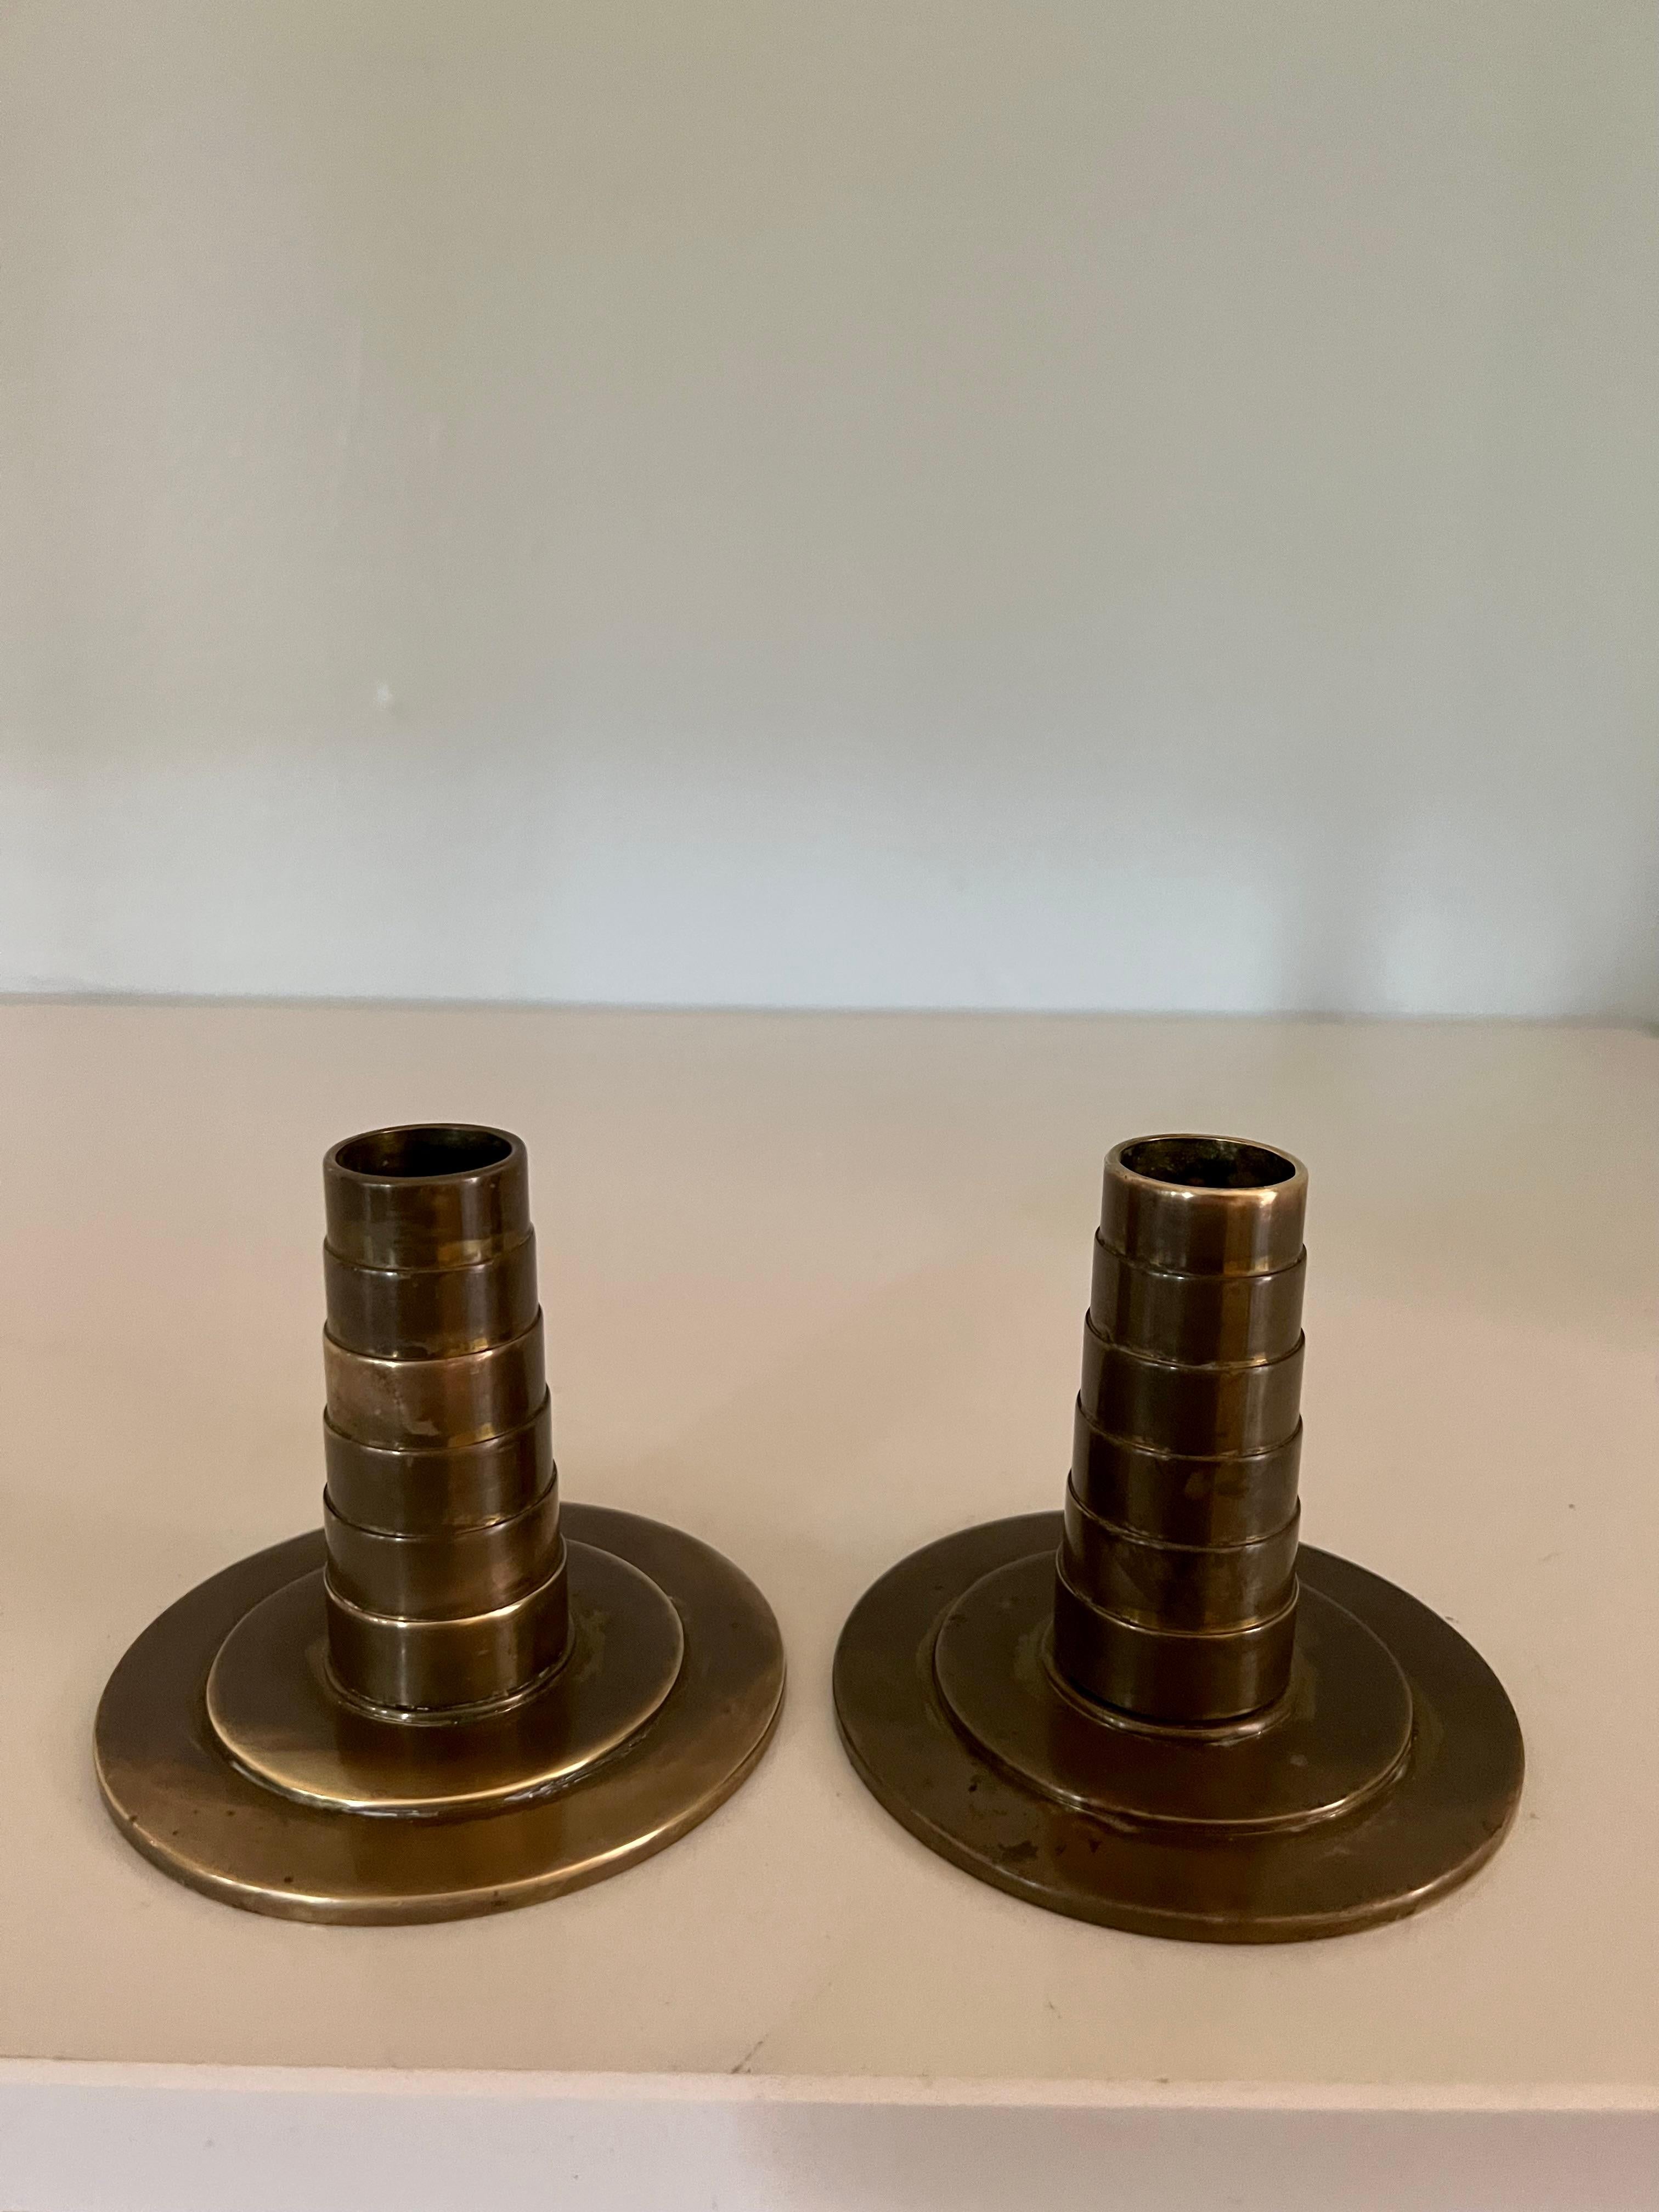 Pair of bronze candlestick holders. A compliment to many interiors, and especially those with an arts and crafts point of view. A solid addition to any table. Perfectly patinated and will catch candlelight wonderfully. 

